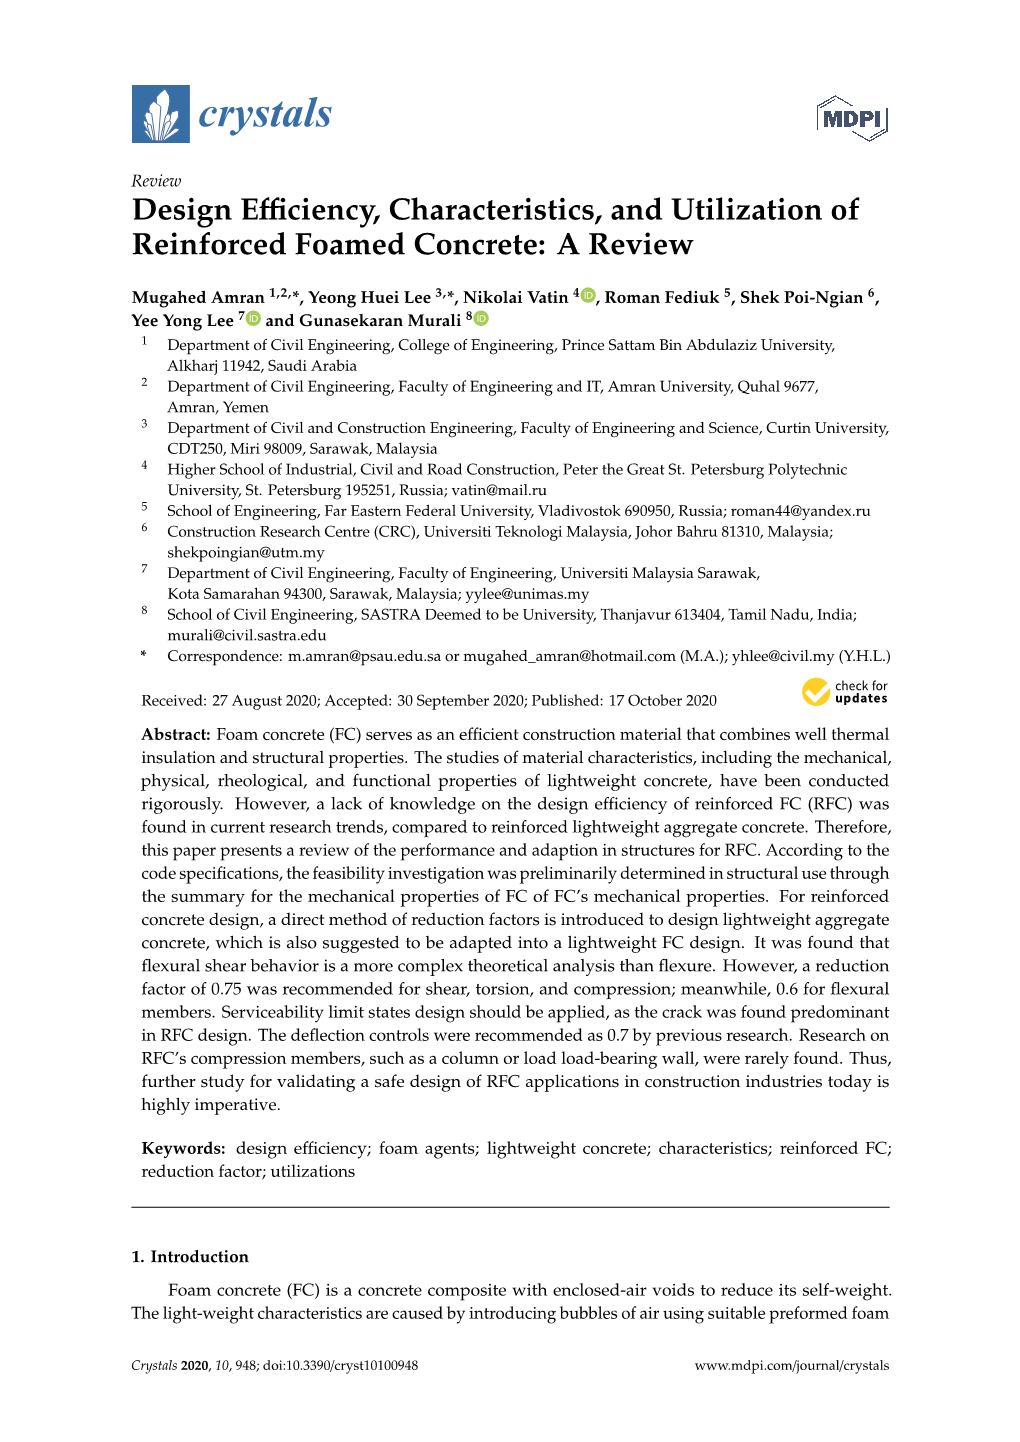 Design Efficiency, Characteristics, and Utilization of Reinforced Foamed